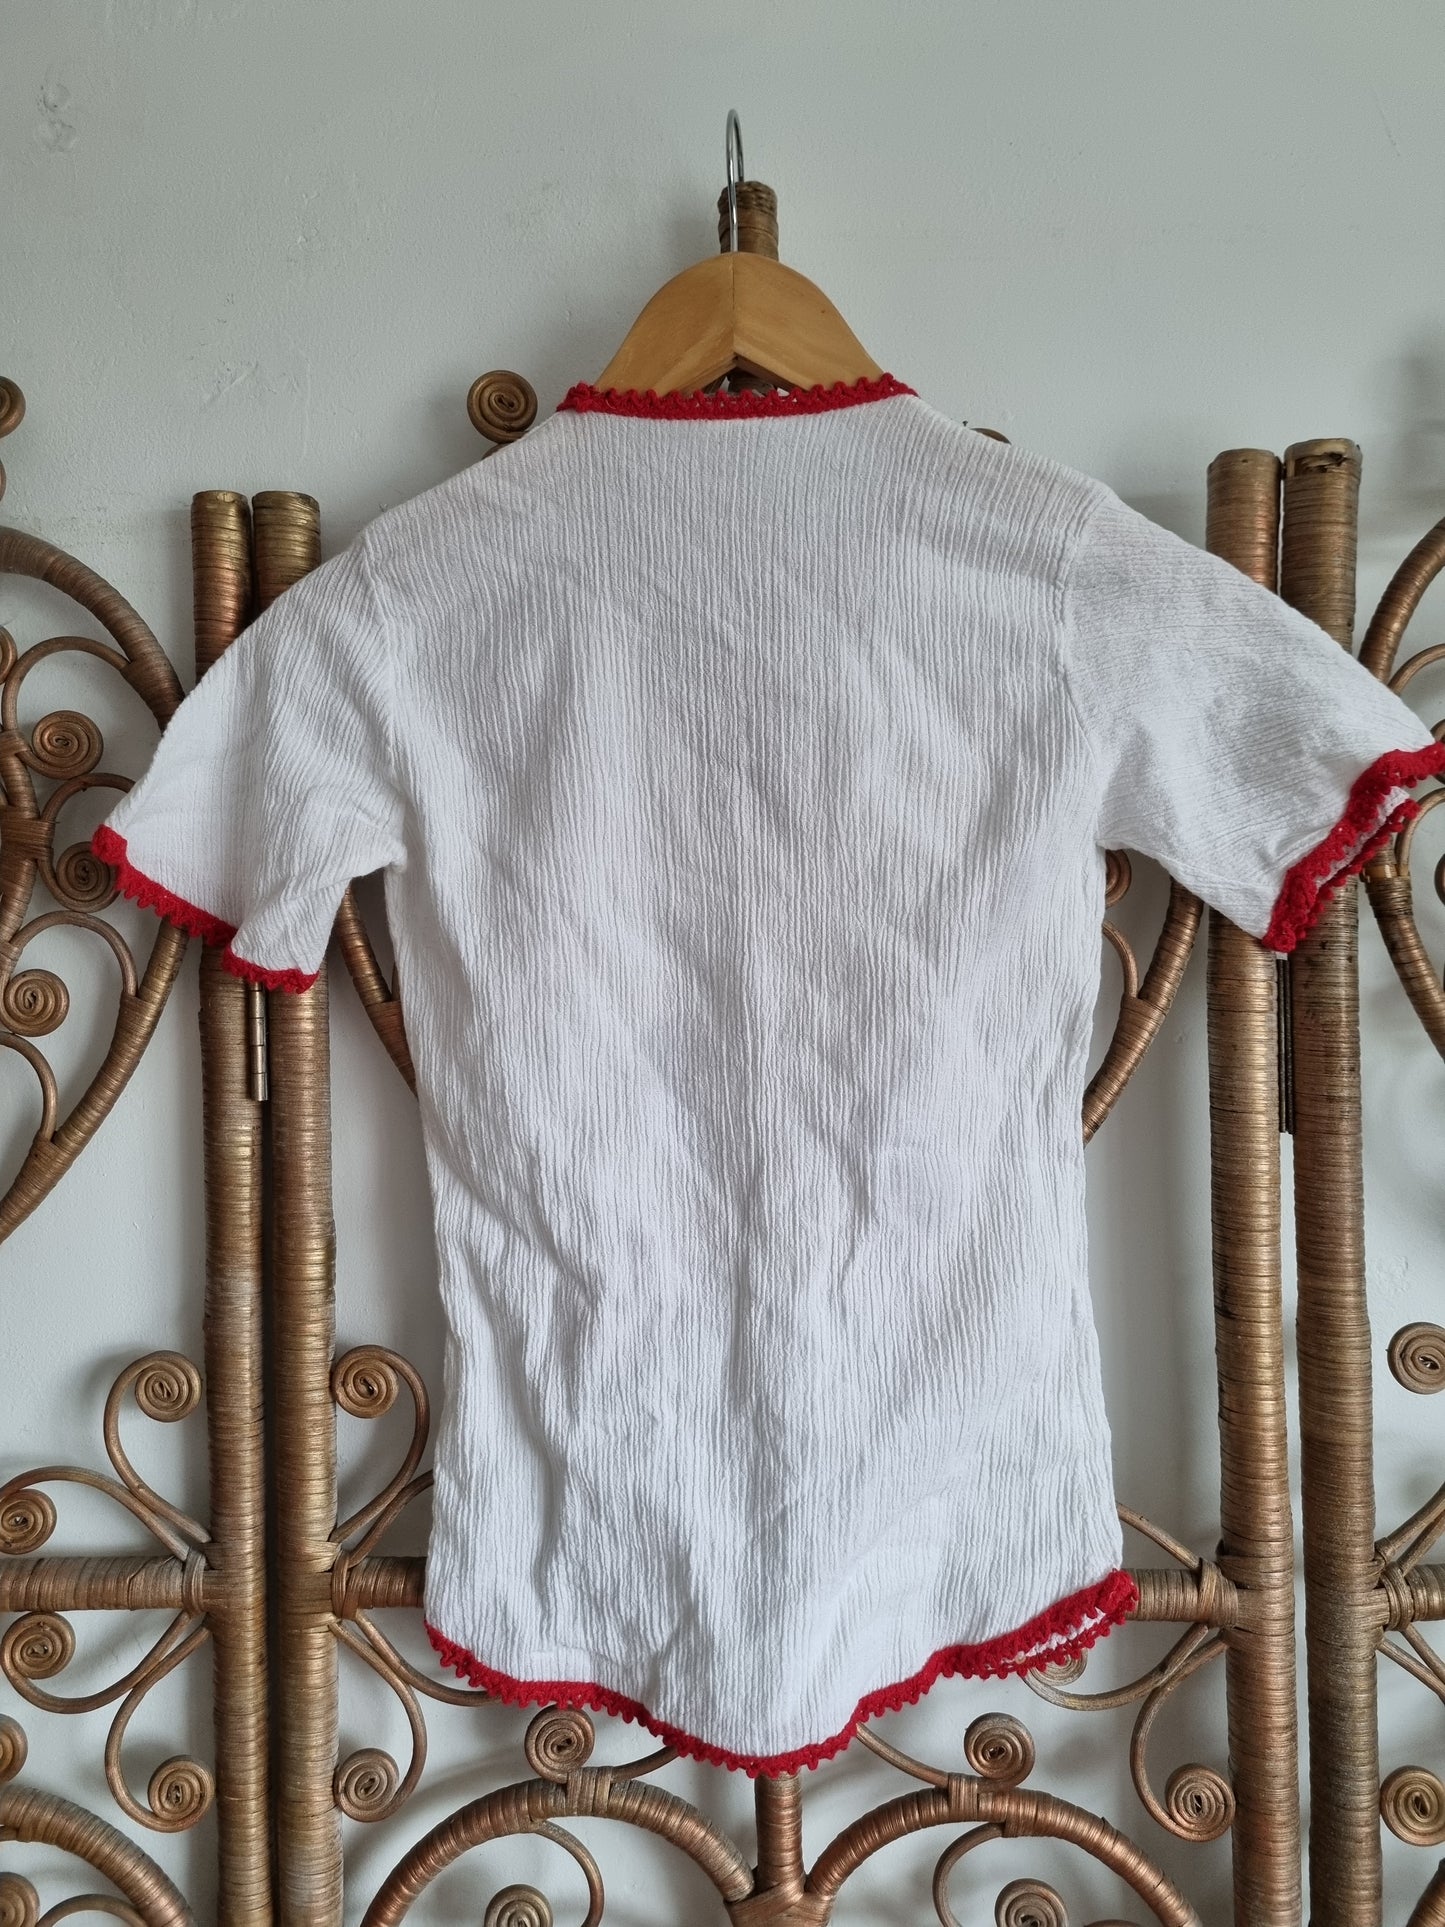 Vintage cheesecloth tunic